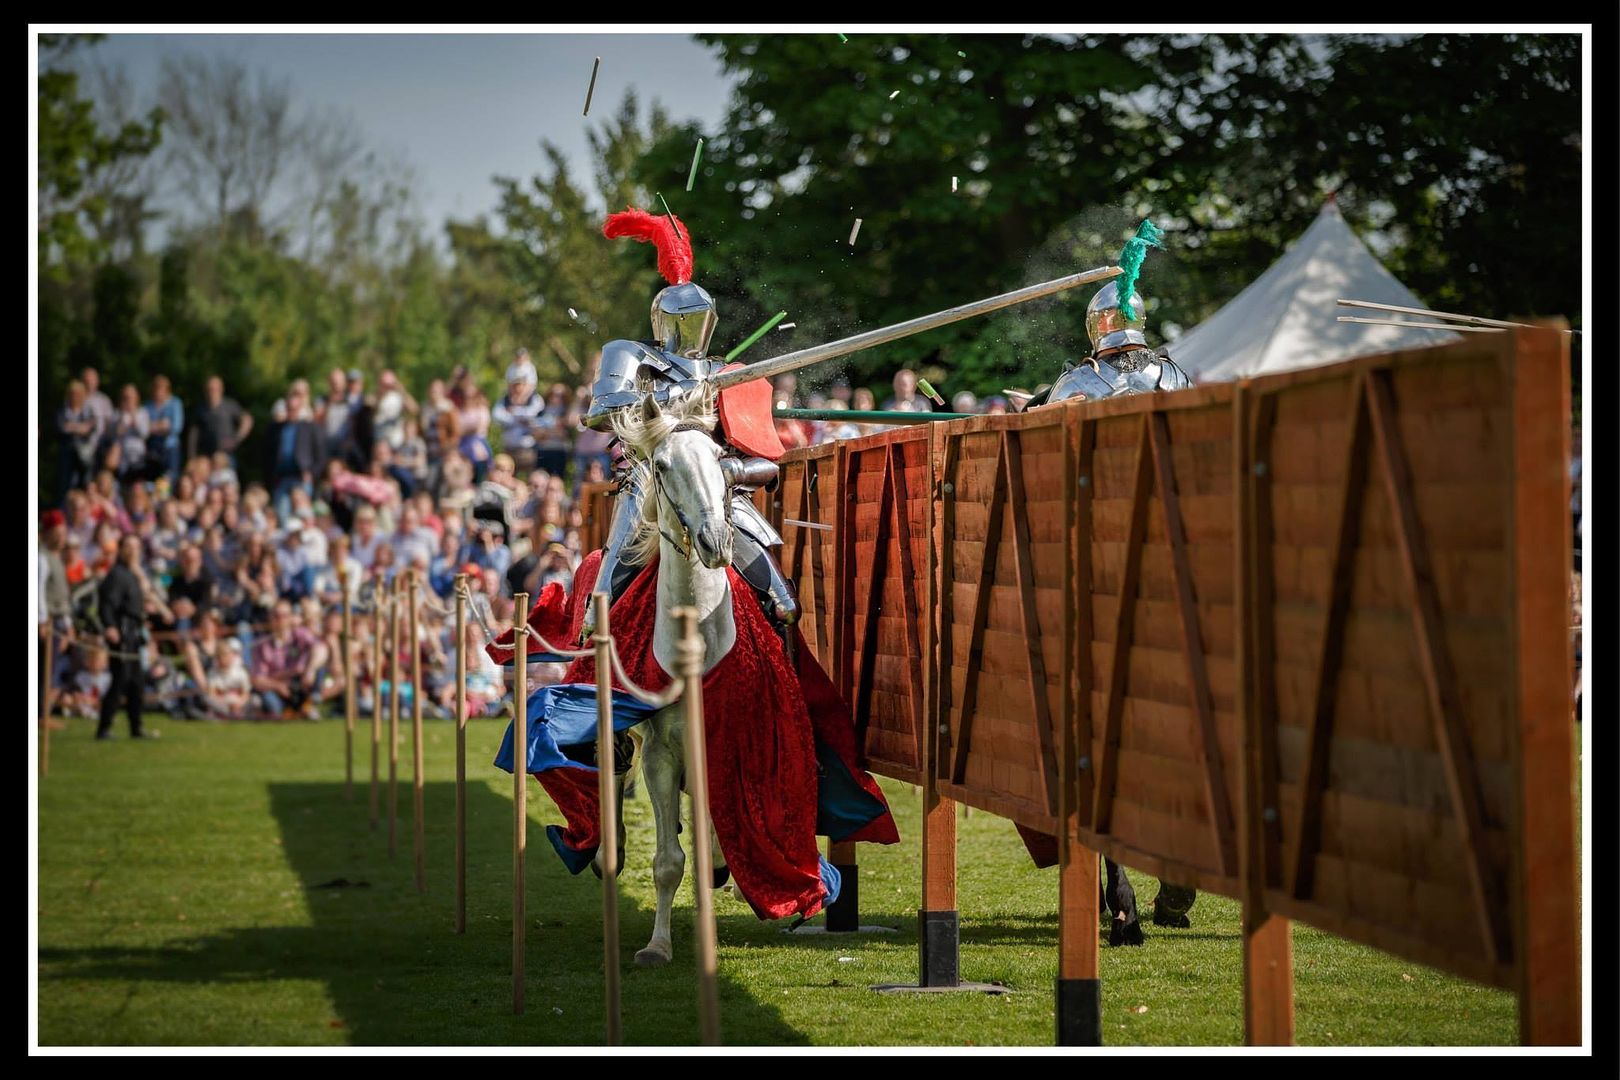 Benedict Green(right, green feathers) breaks his lance against Jason Kingsley(left, red feathers) during Ben's first professional joust at Hedingham Castle 2014 (photo by NWY Photography)